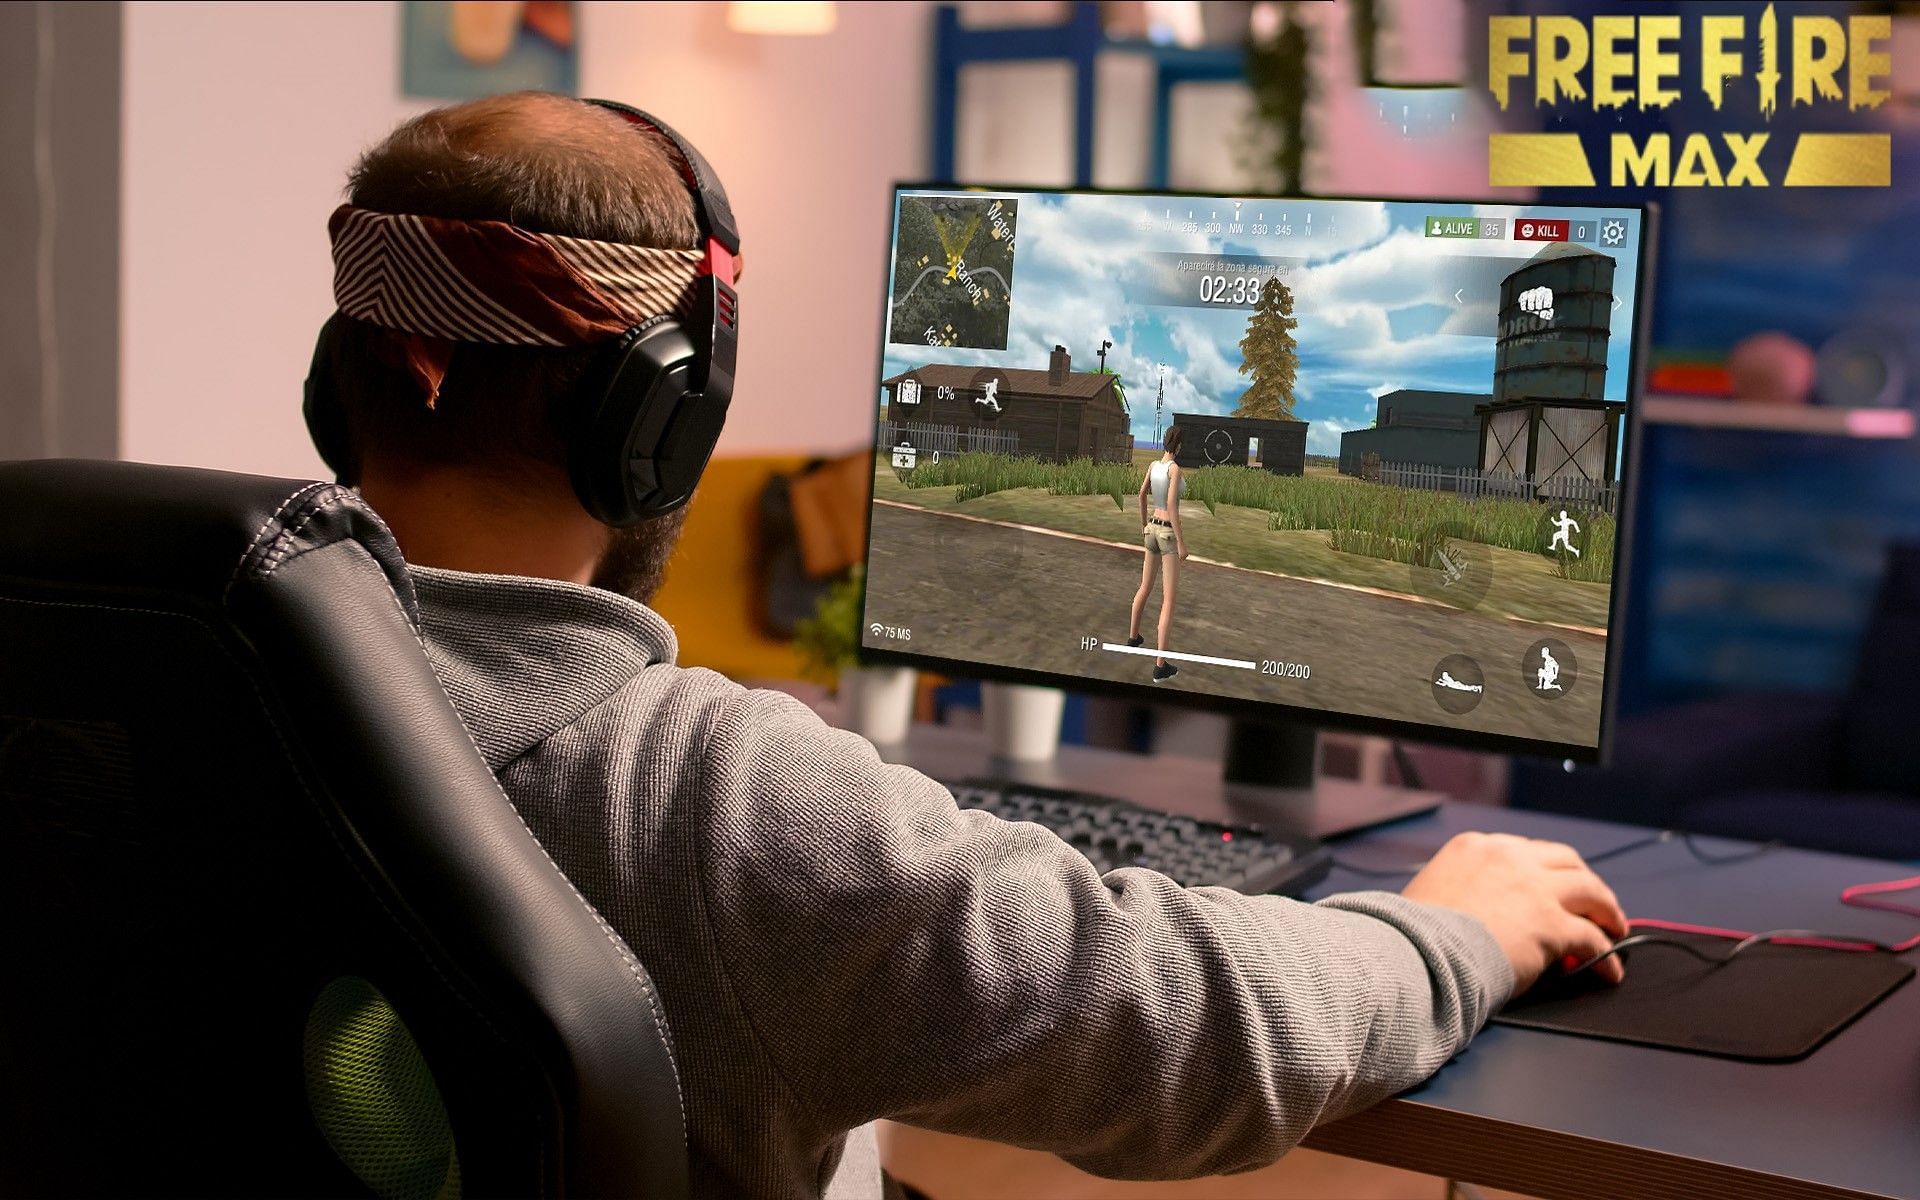 With the usage of emulators, Free Fire MAX can be accessed on PCs (Image via Sportskeeda)